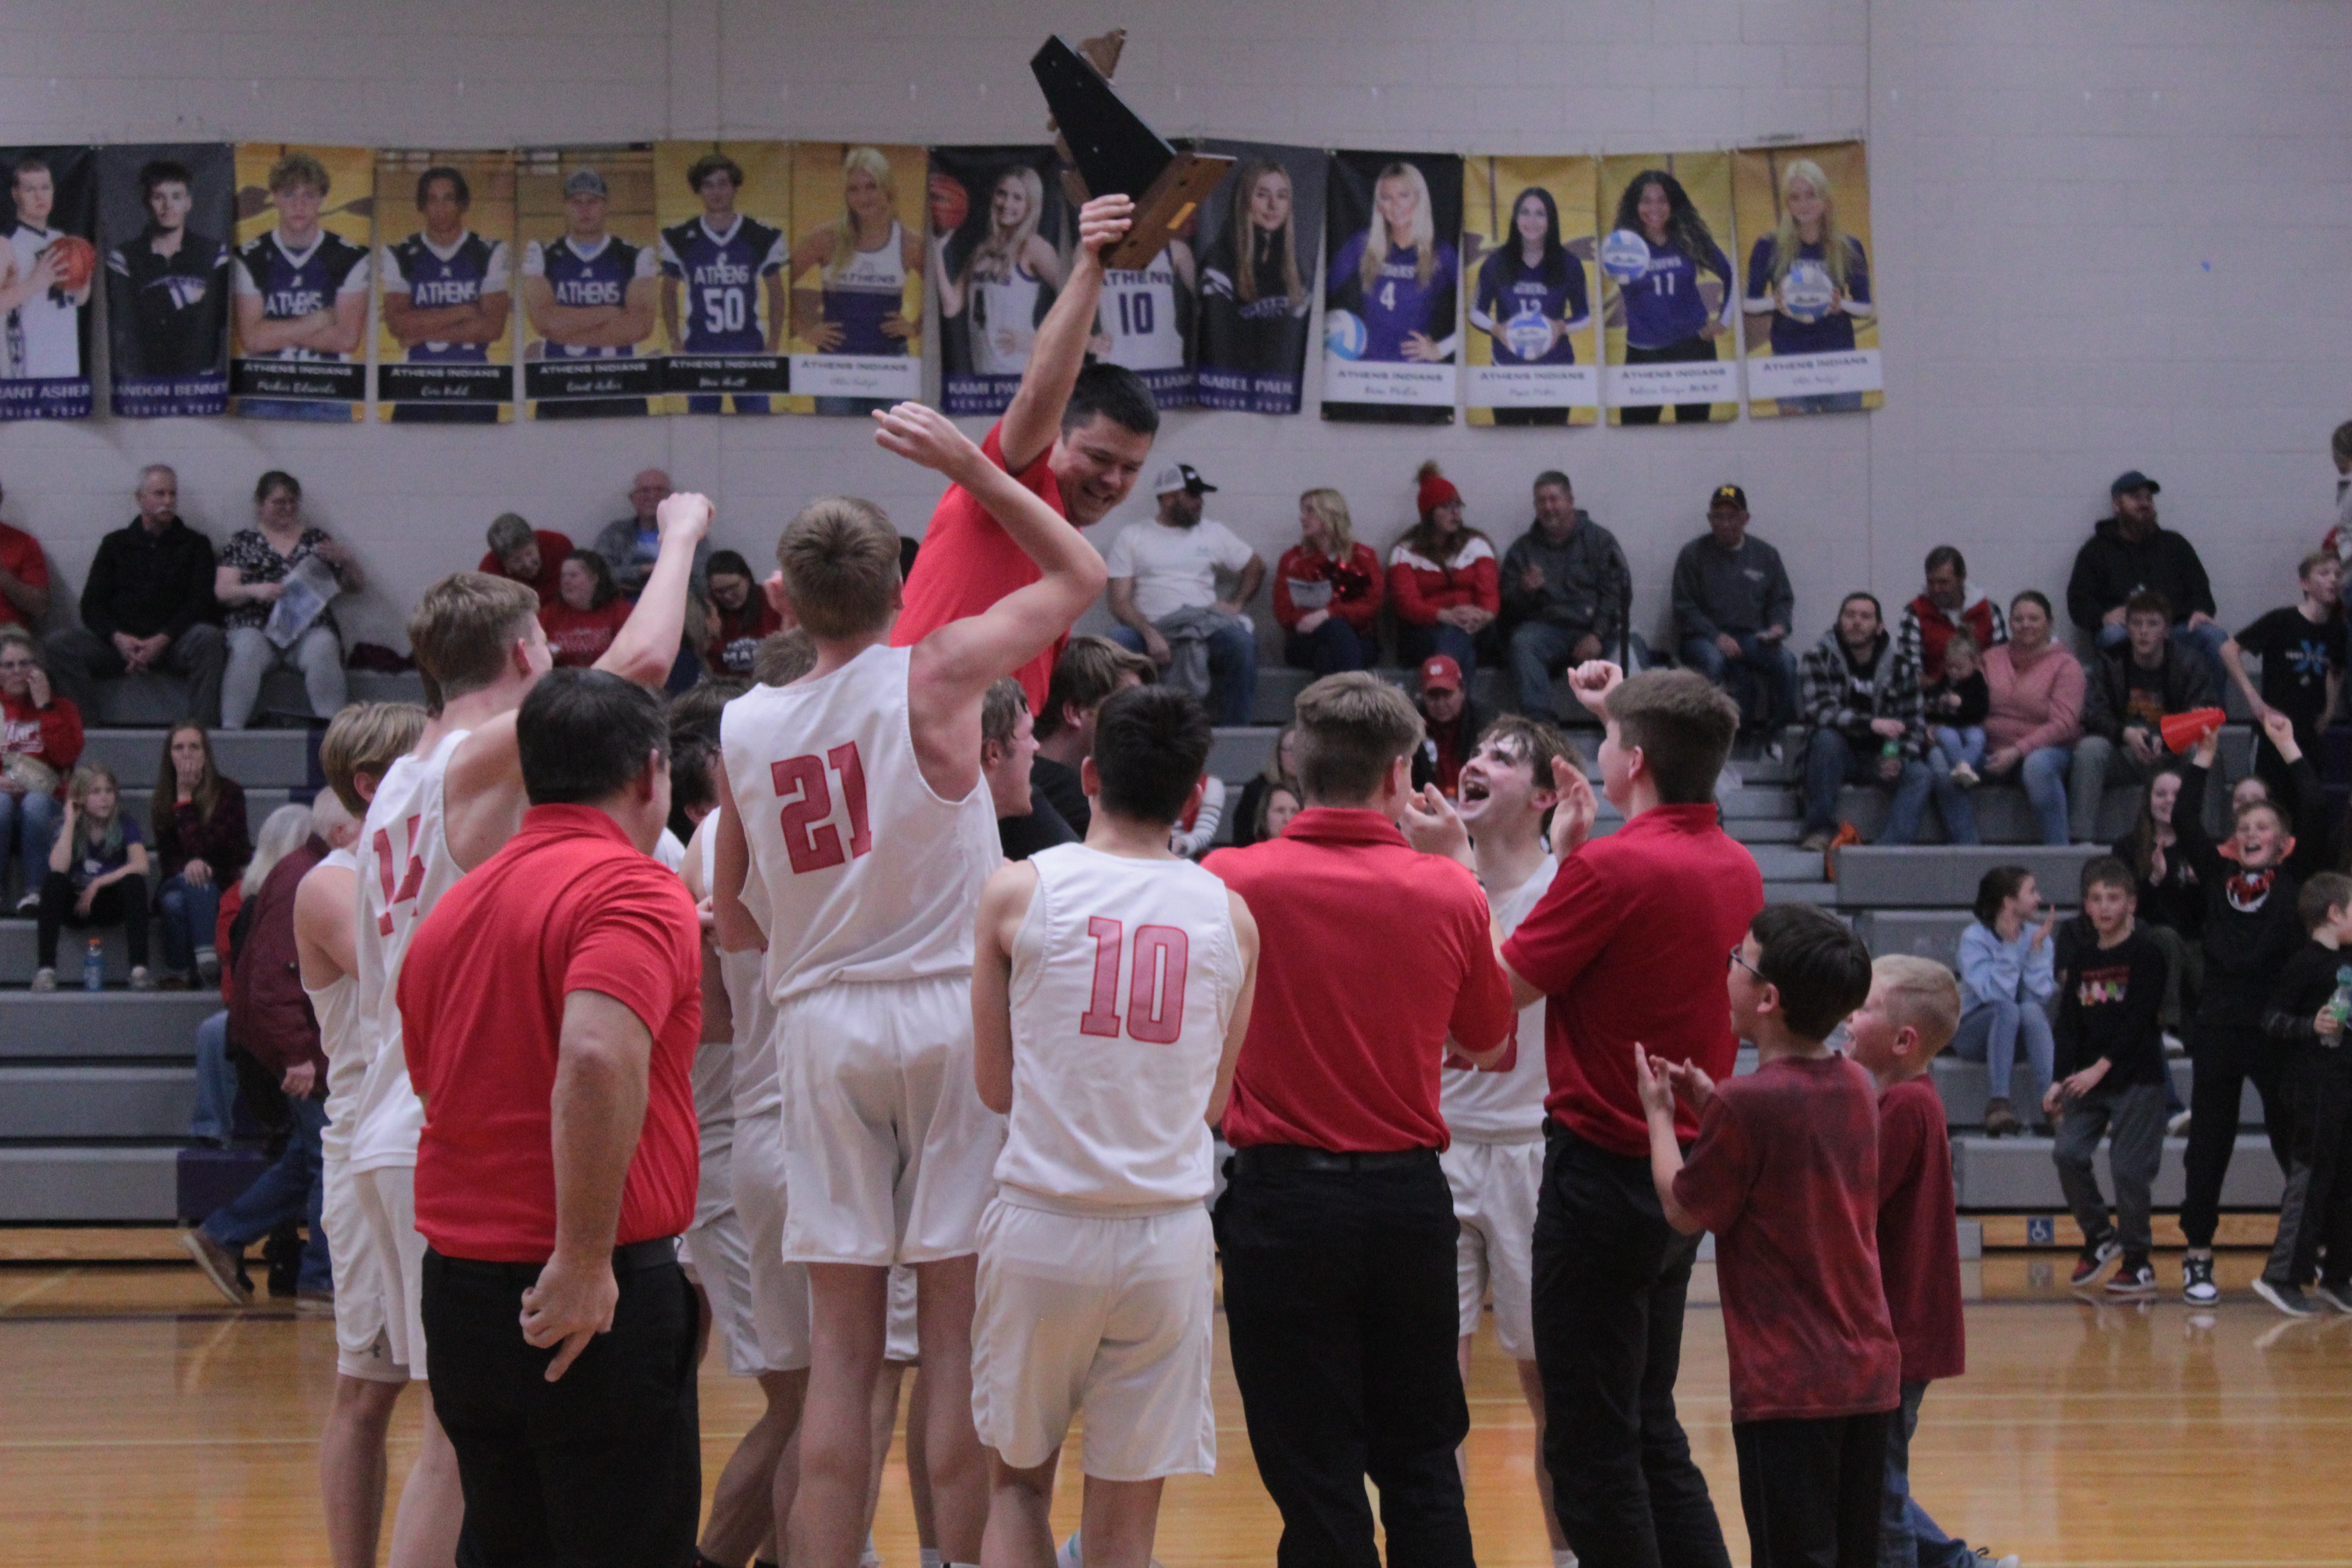 Howardsville Christian takes home district title over Colon